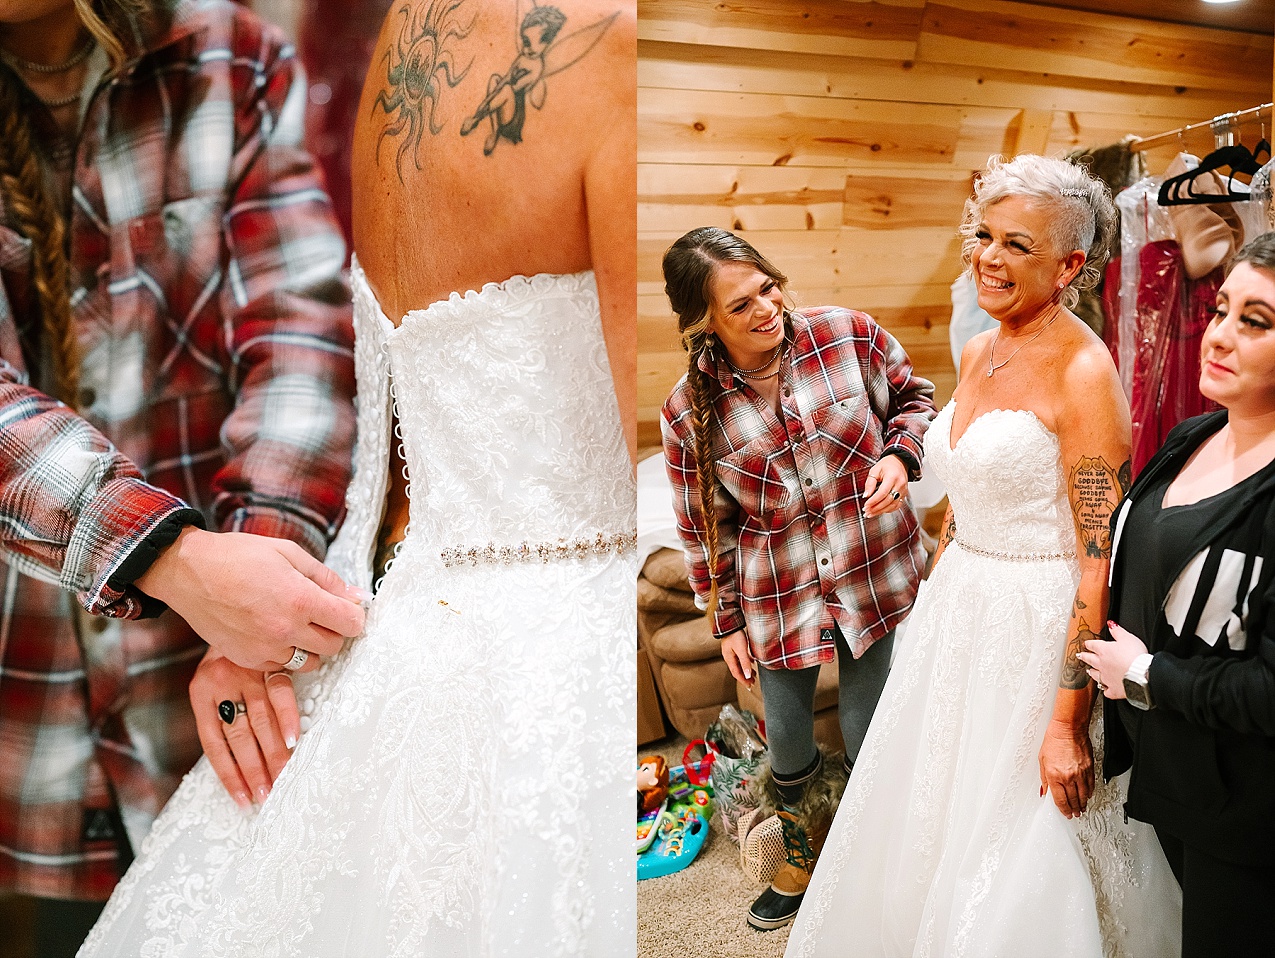 Wintery Pine River Ranch wedding brides getting into her dress